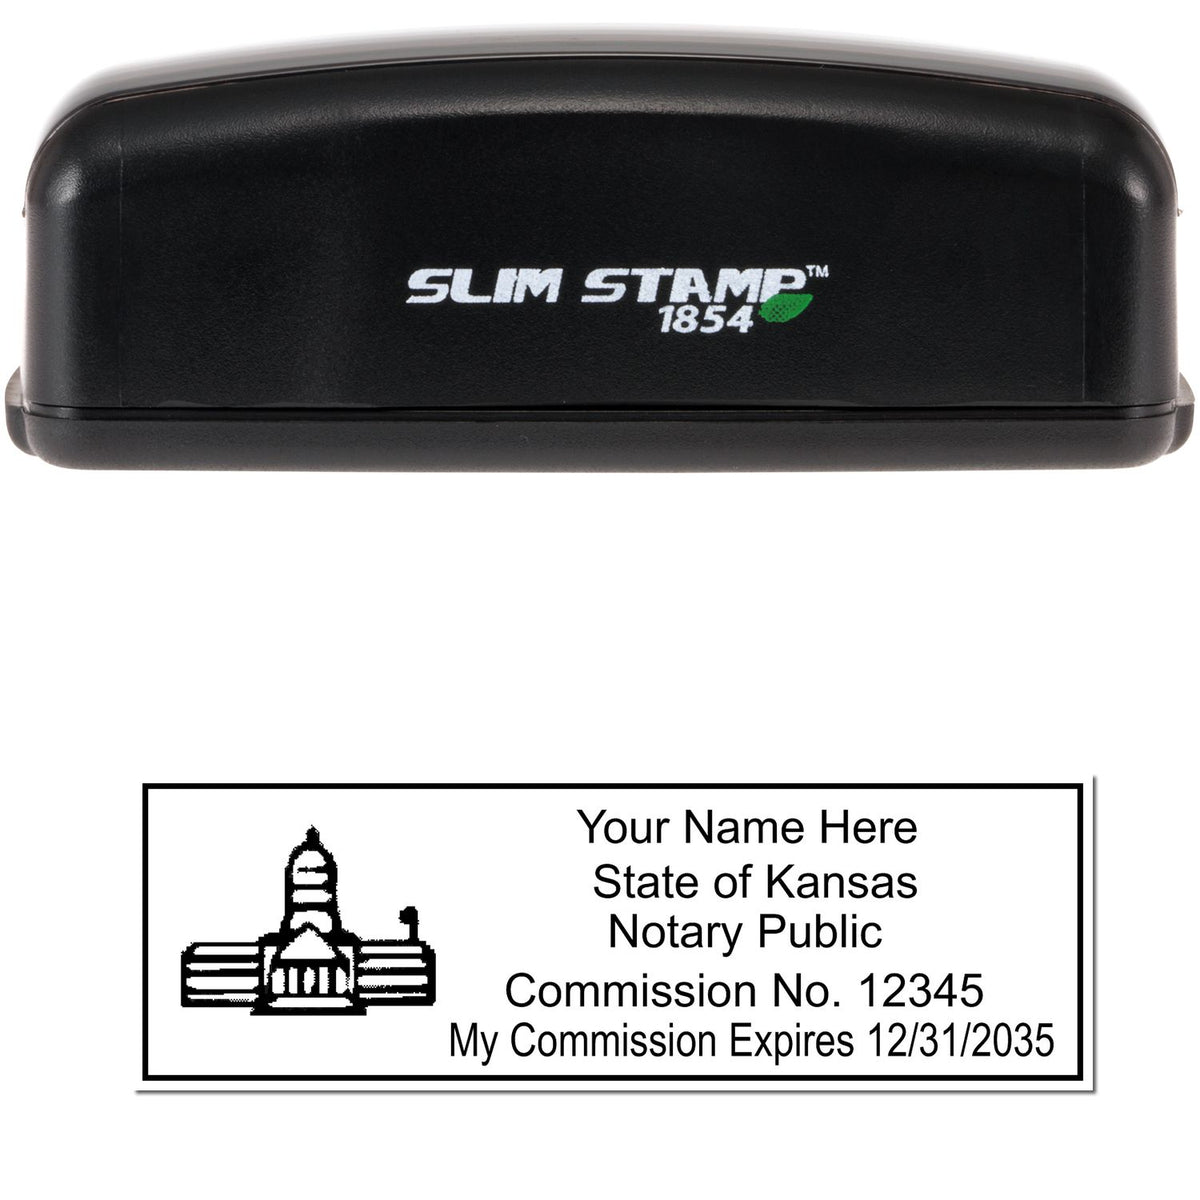 The main image for the Slim Pre-Inked State Seal Notary Stamp for Kansas depicting a sample of the imprint and electronic files